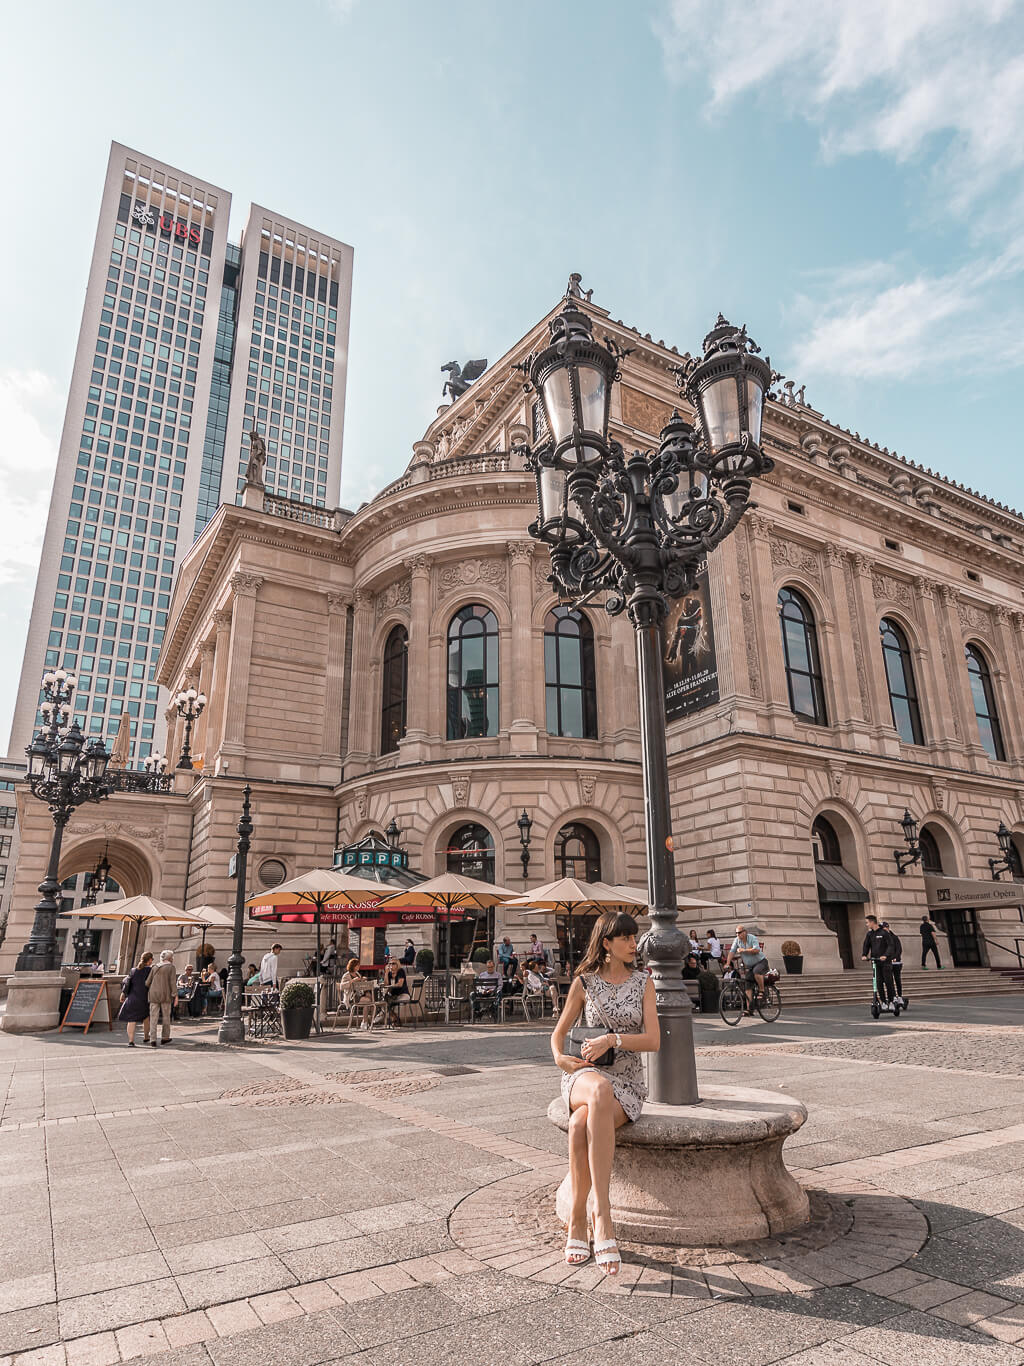 Frankfurt, Germany - What to do and see in Frankfurt, cool hotel, shopping and food spots not to be missed